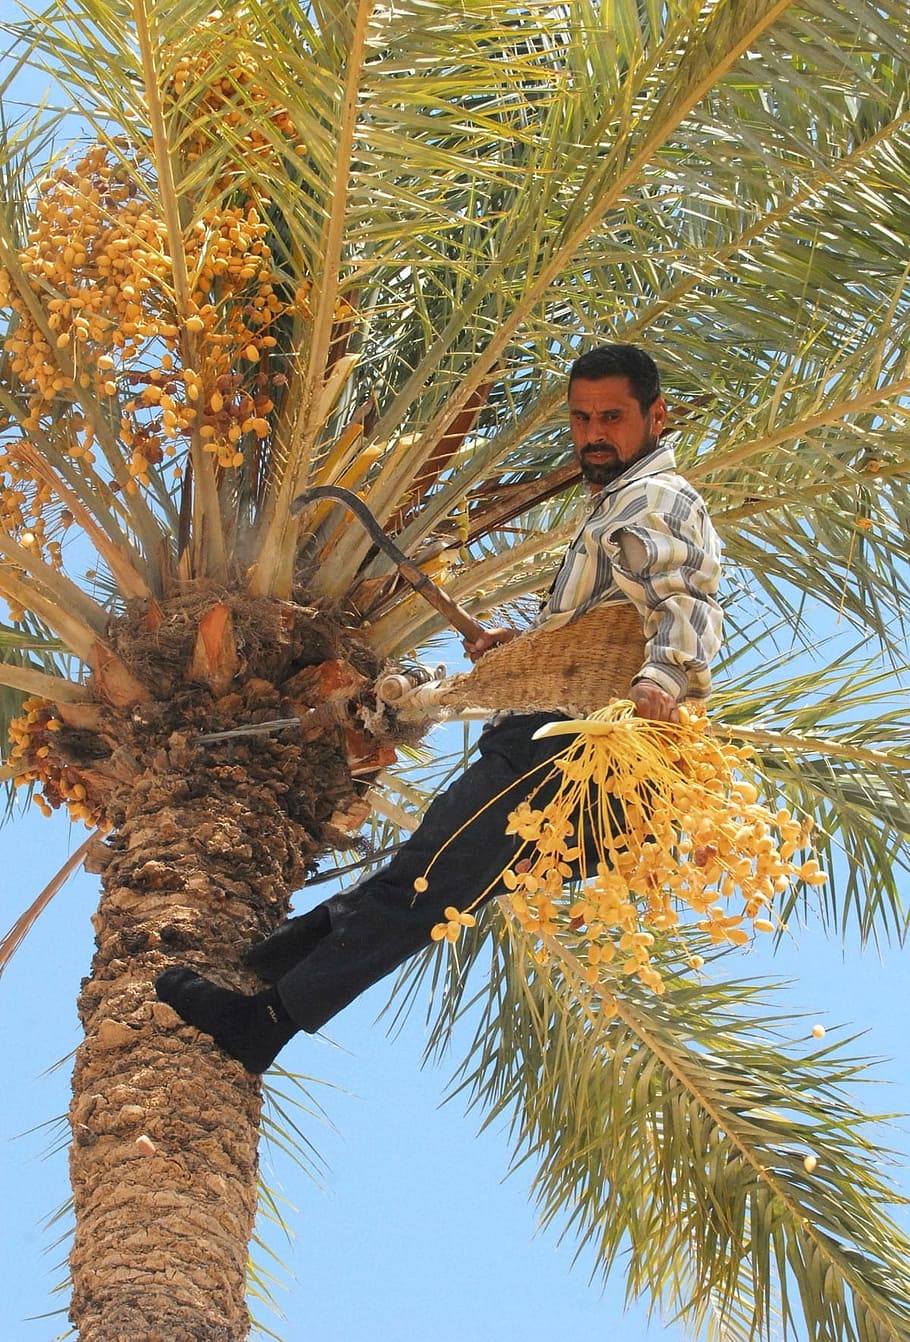 iraq, date tree, harvesting, man, dates, tree, crop, produce, agriculture, worker